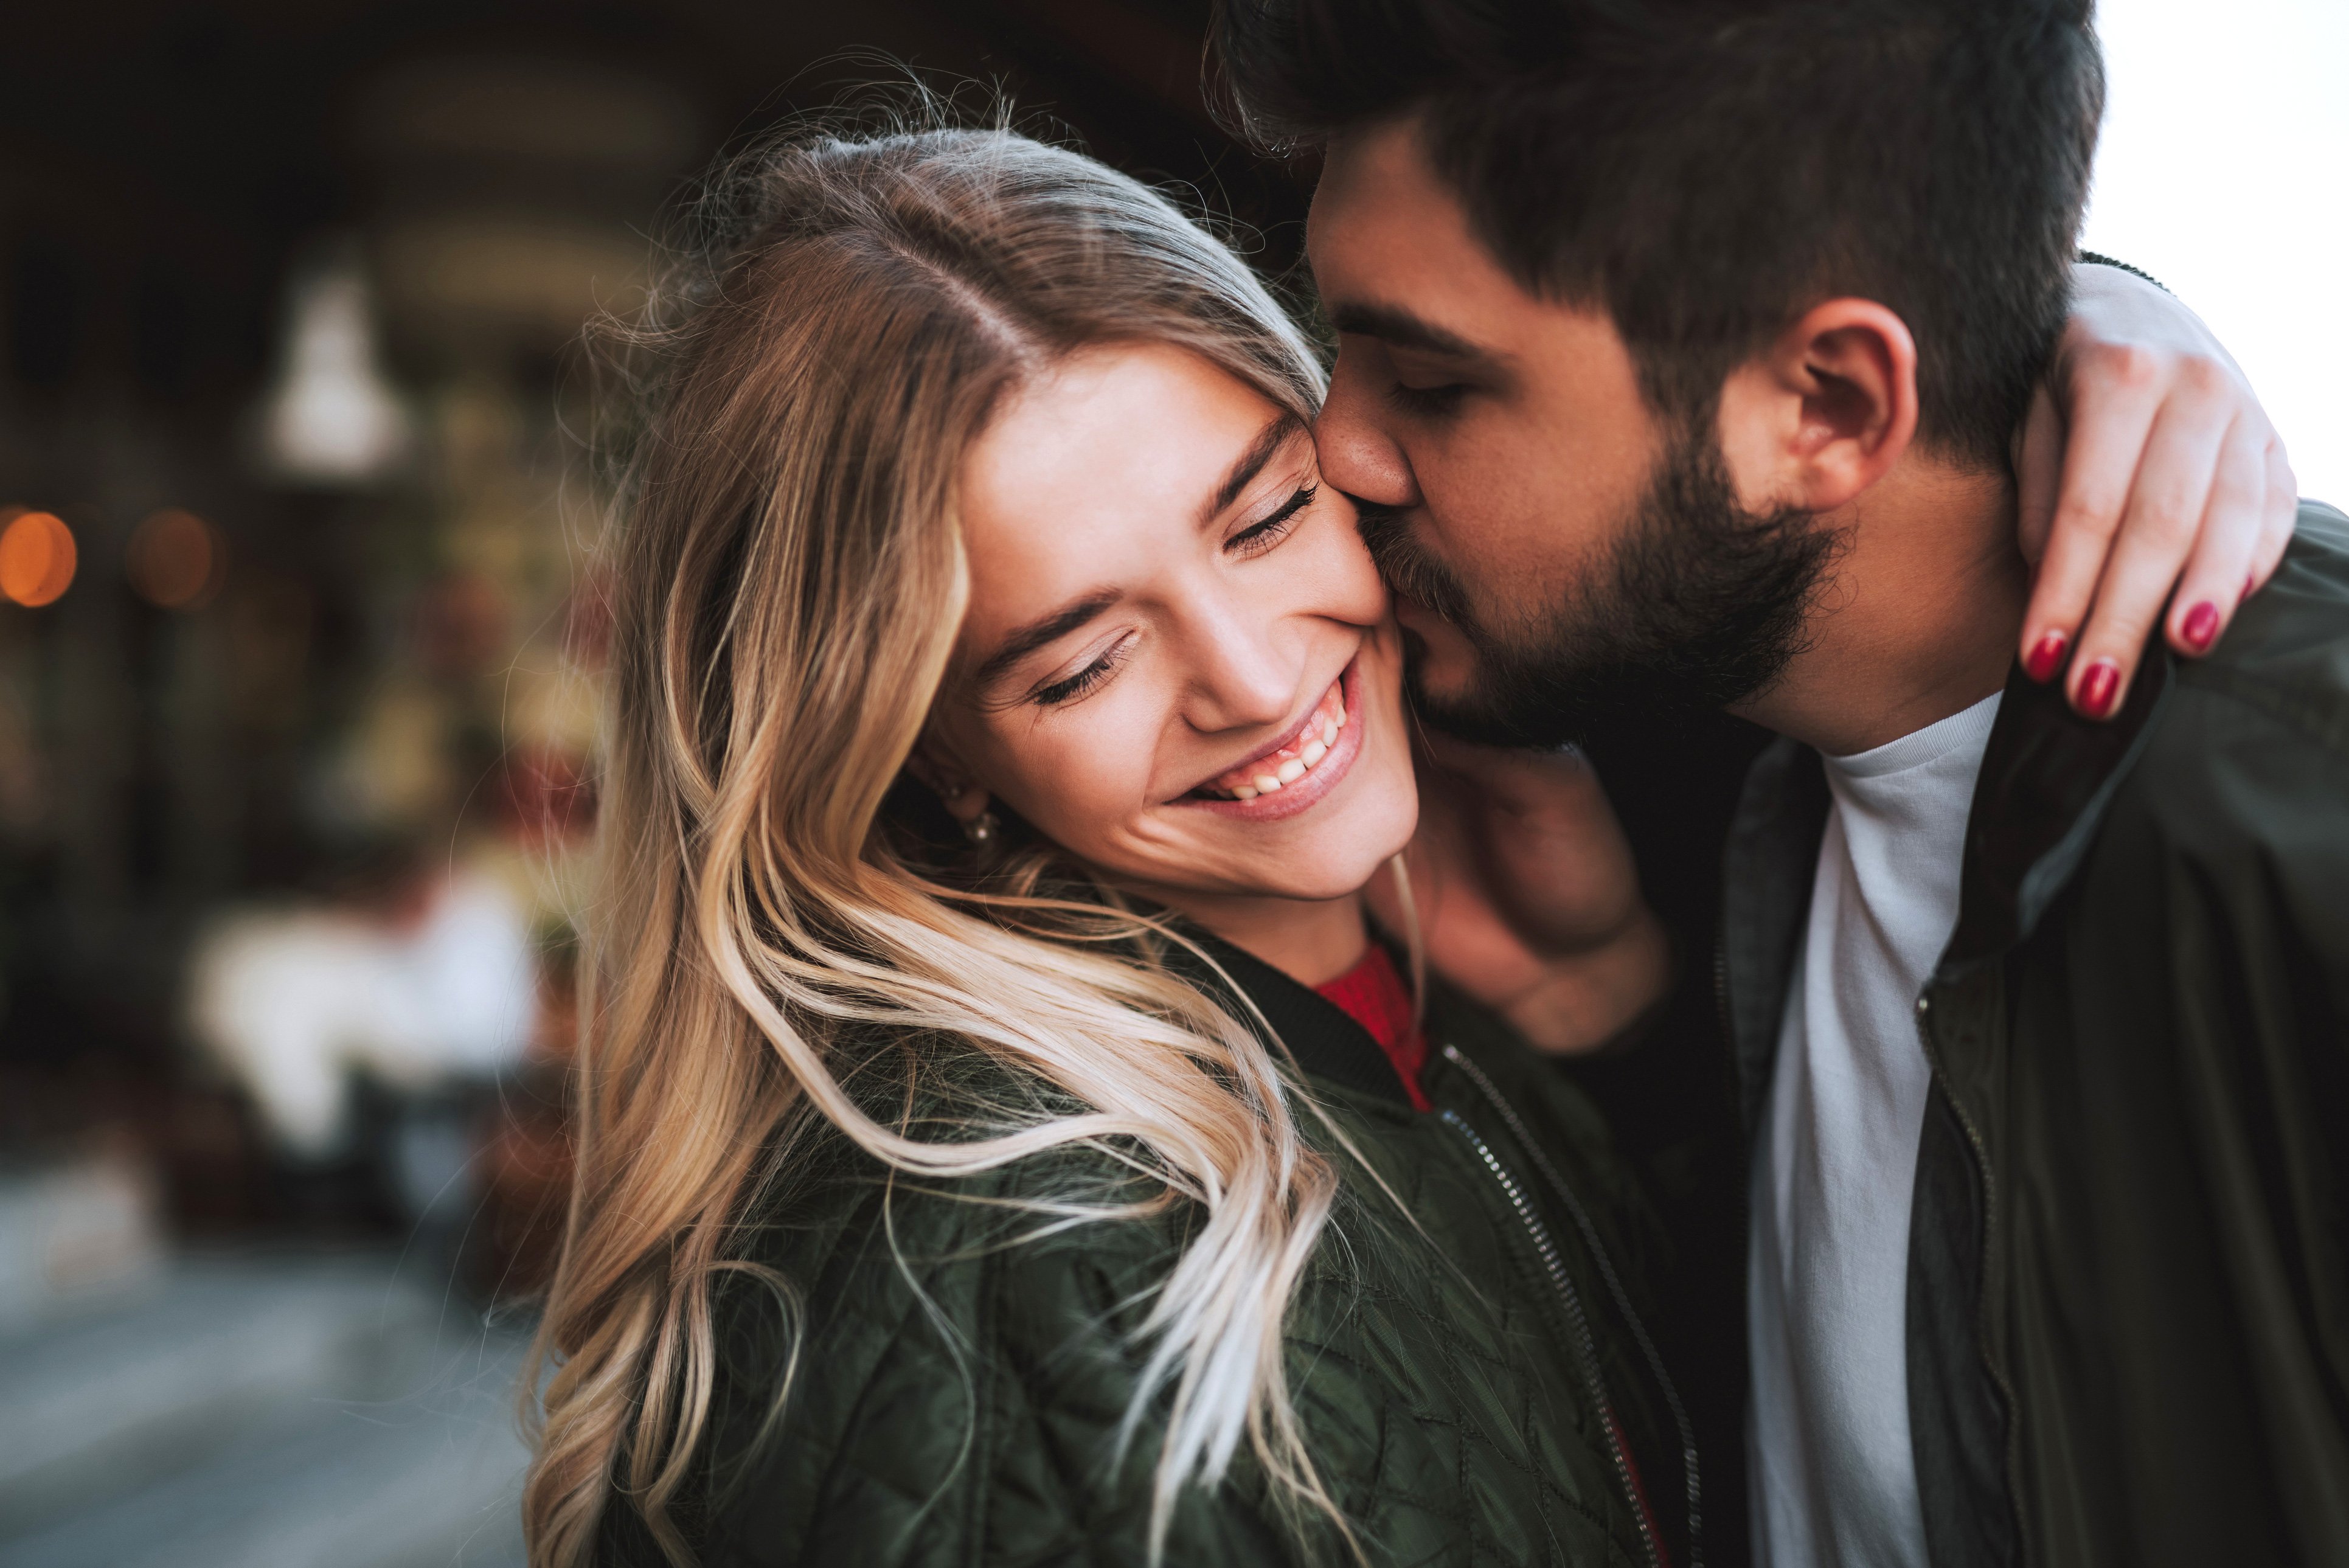 A small study advised participants to kiss more often and found some surprising benefits(Image: YakobchukOlena – iStock.com)